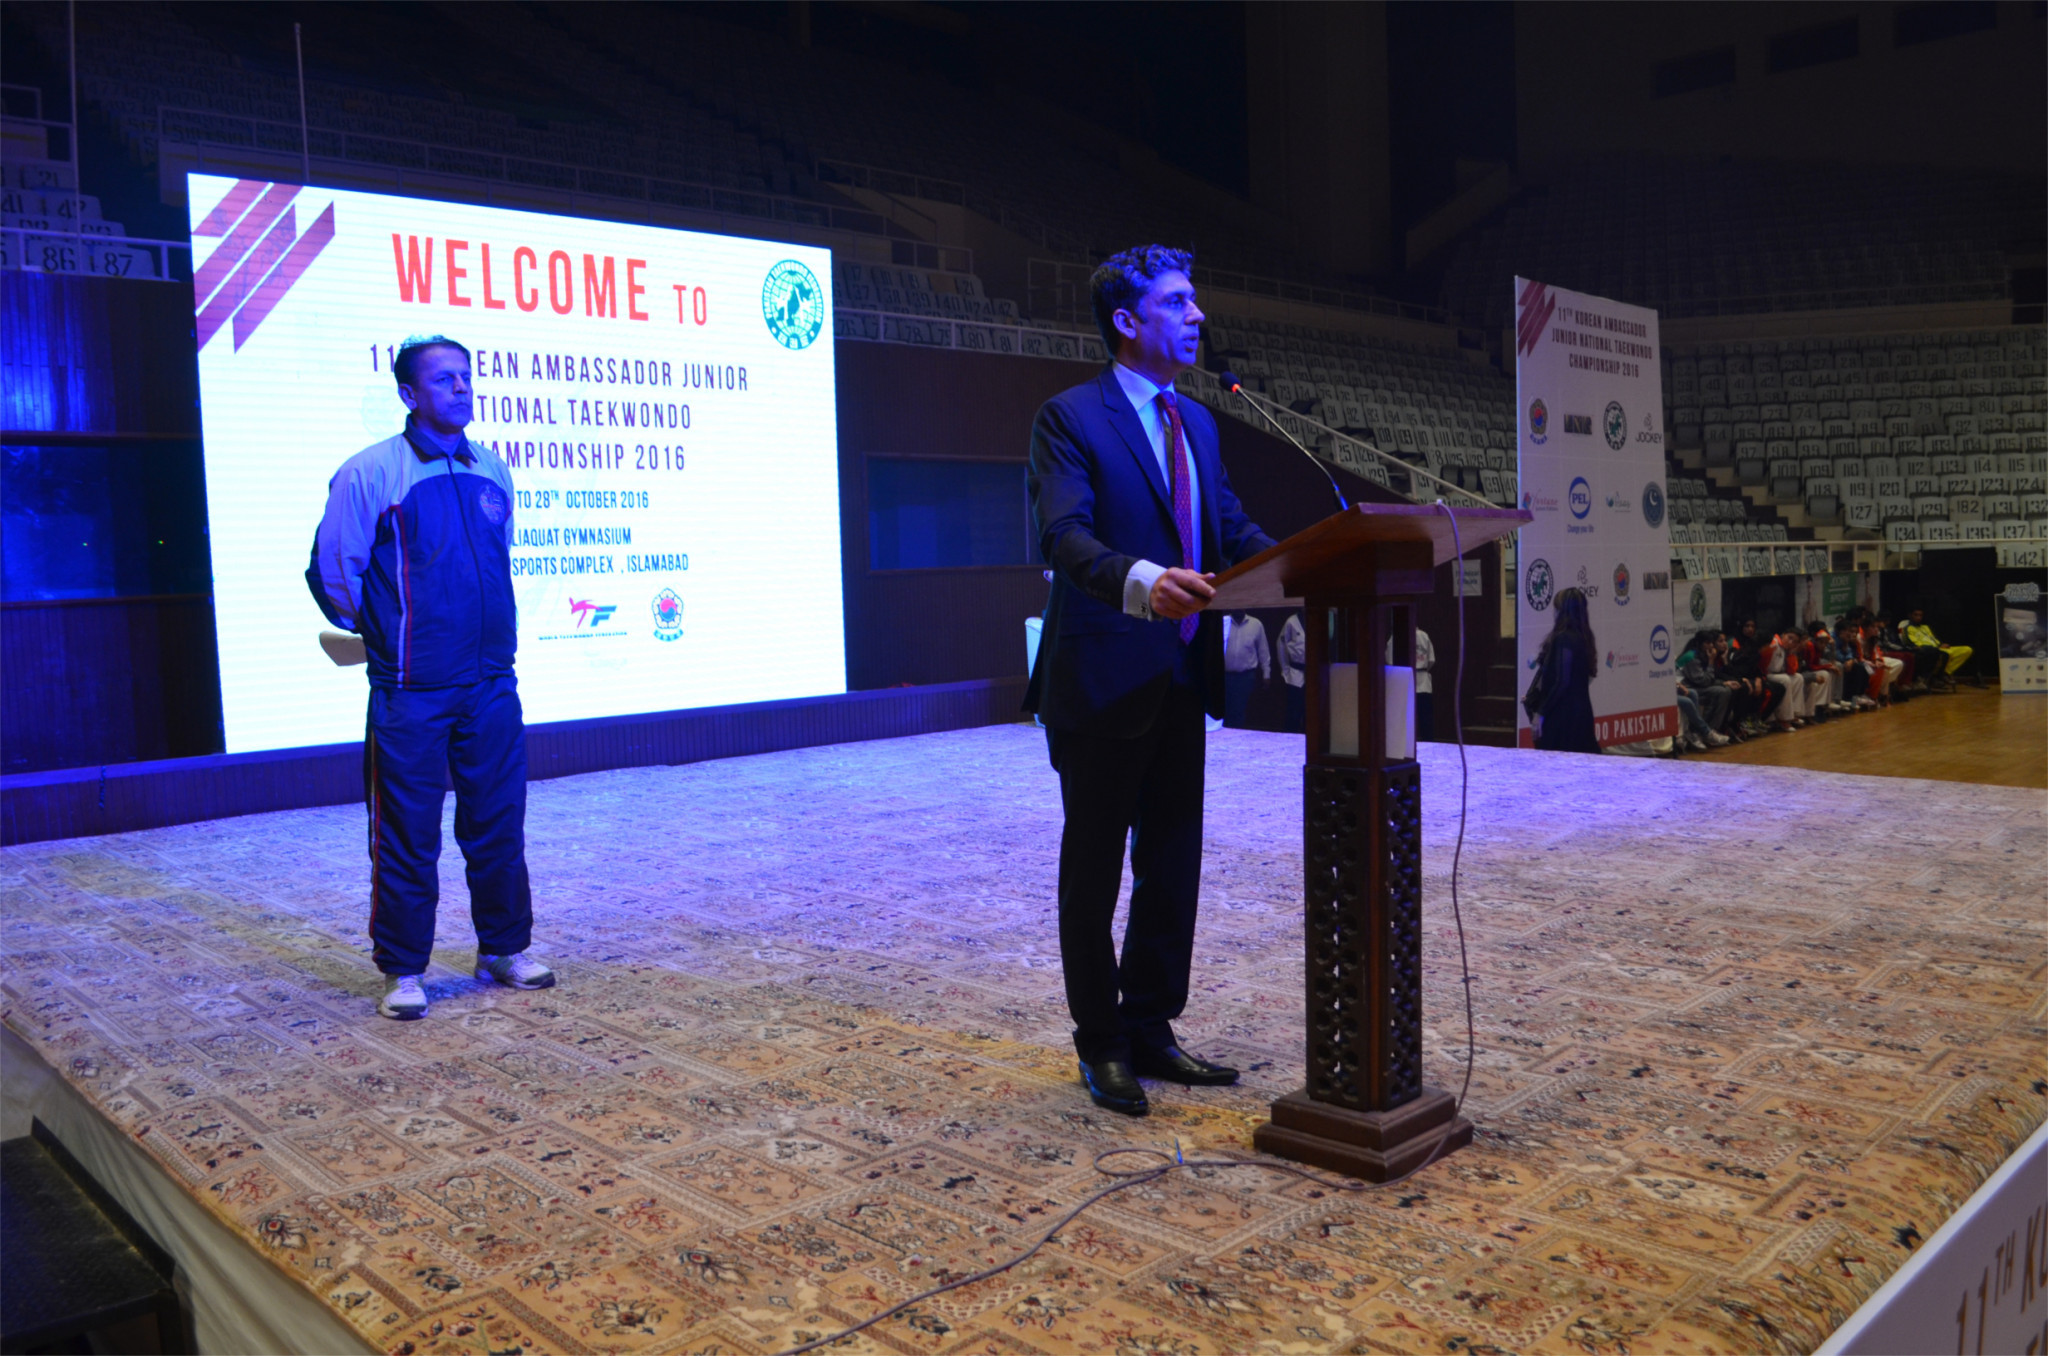 Pakistan Taekwondo Federation President Wasim Ahmed, pictured above making a speech, said he hoped the new online event would help support athletes during 